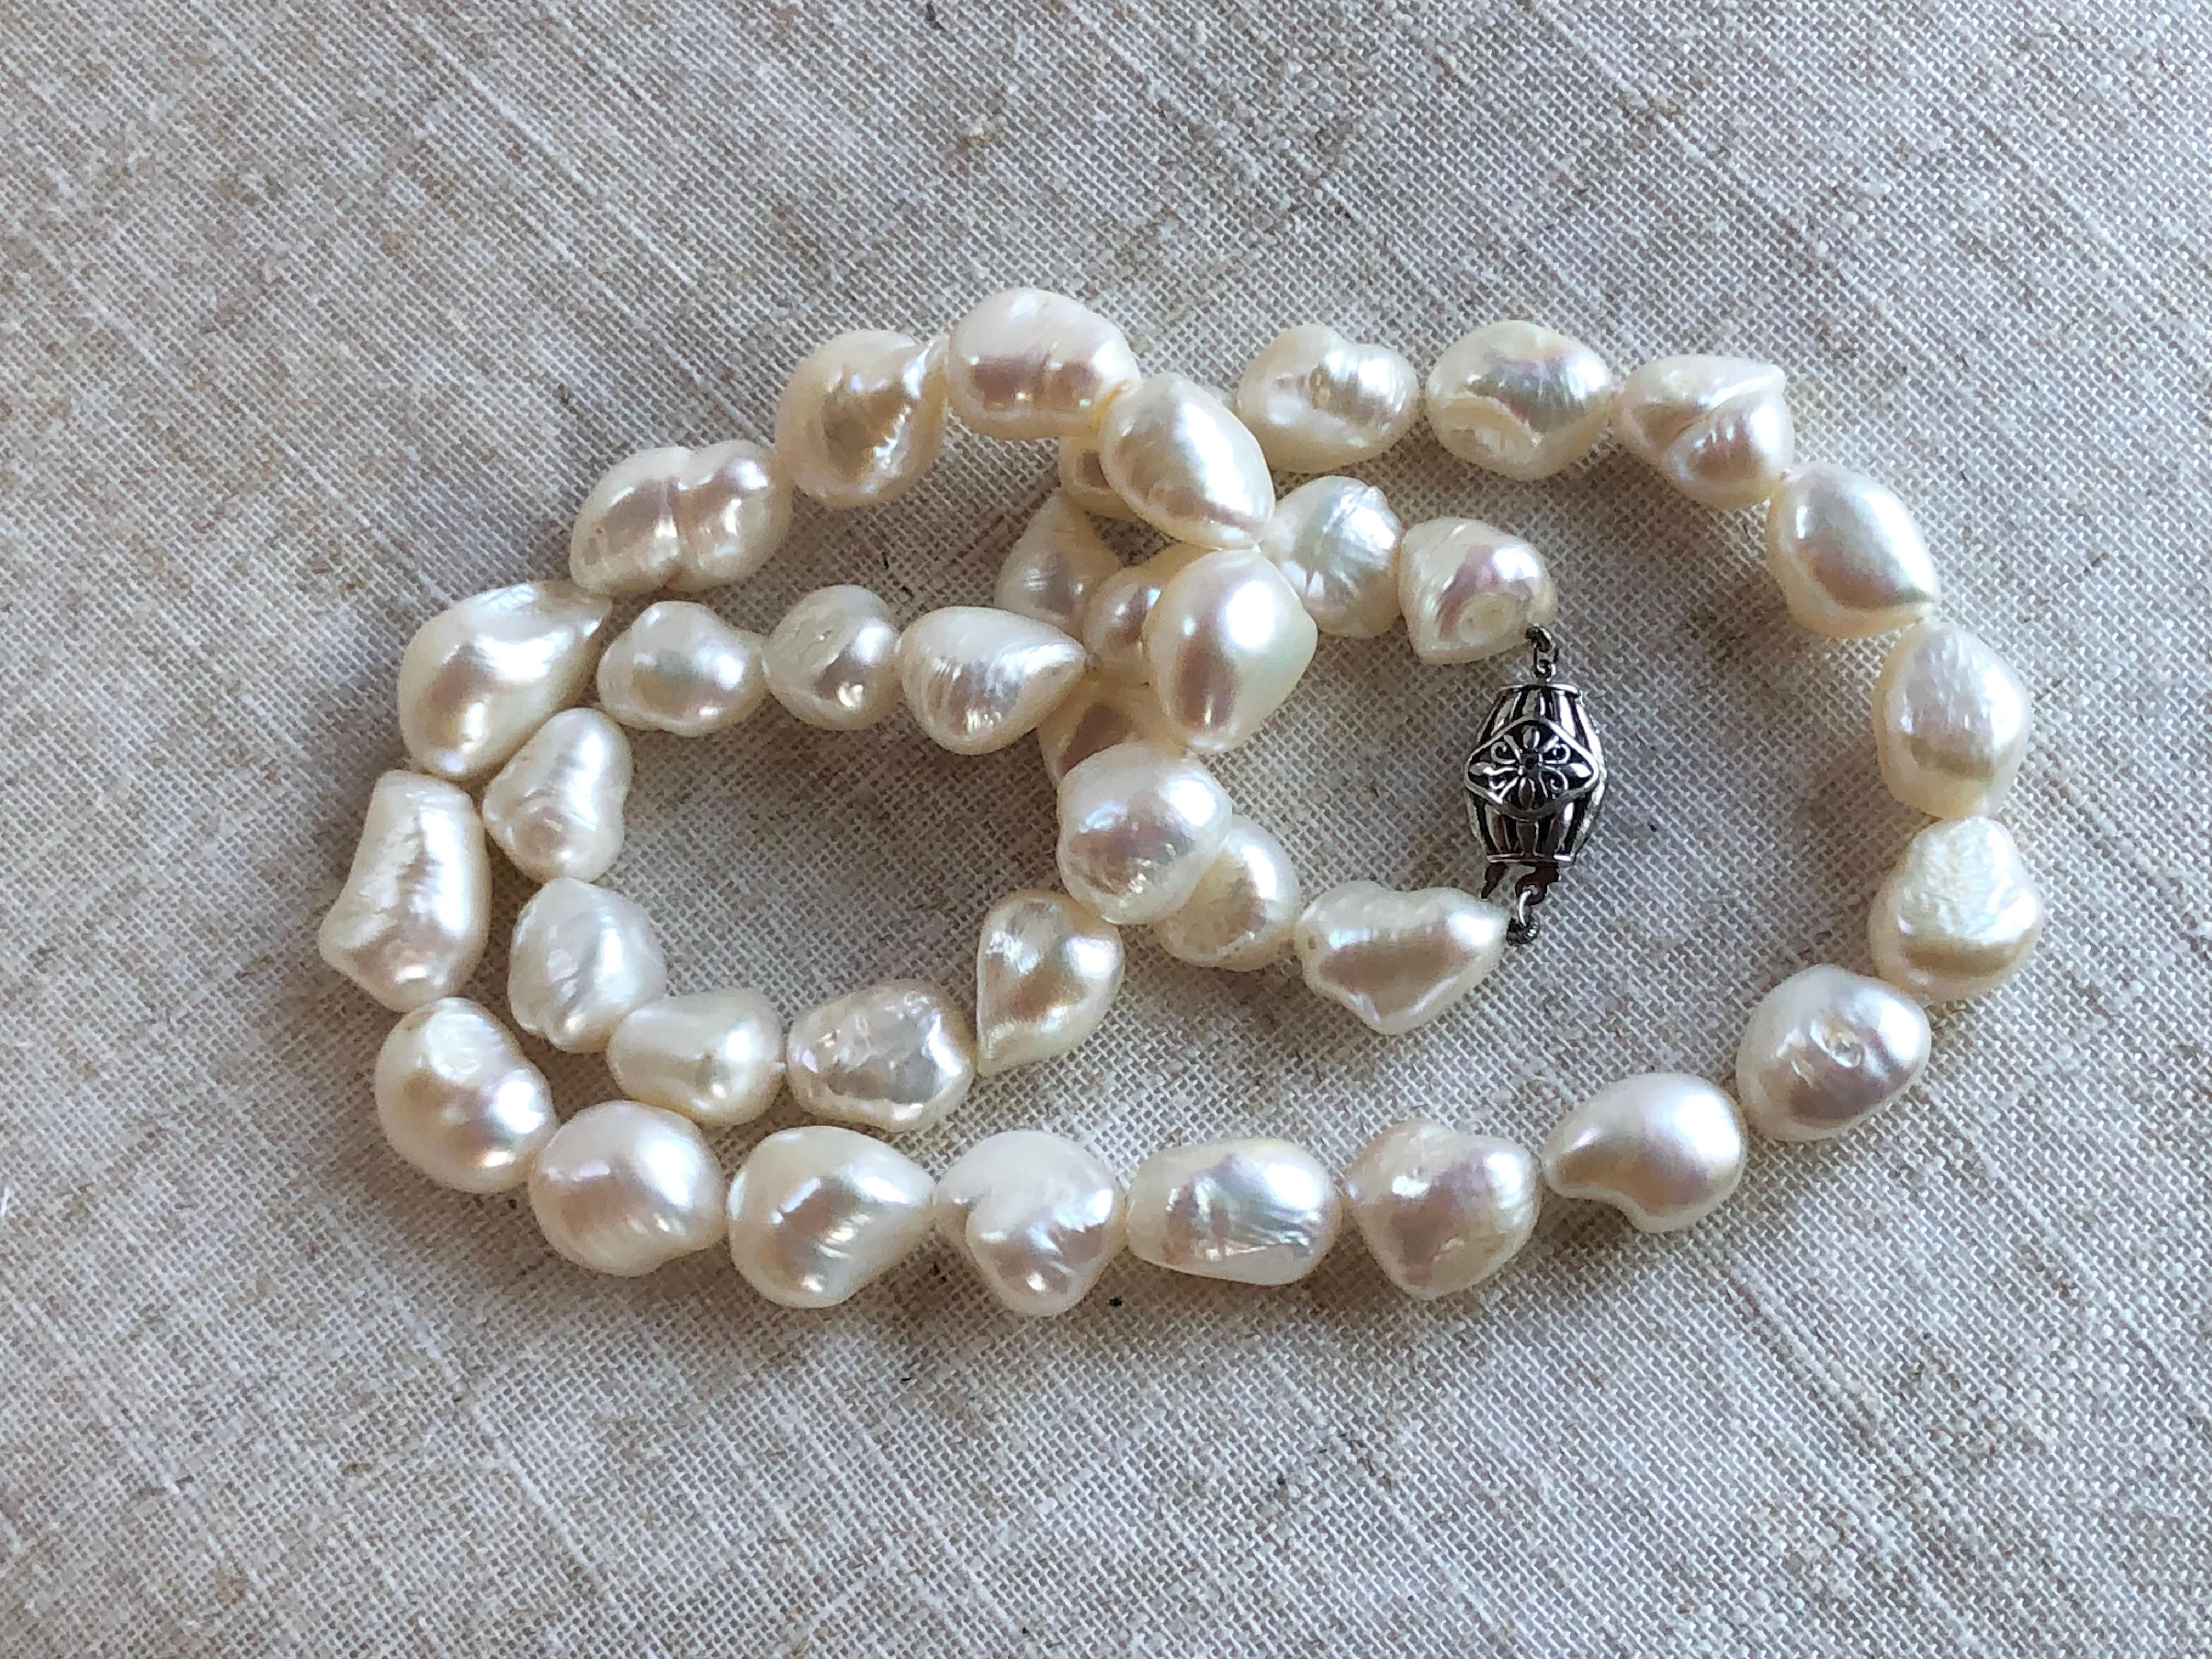 Uncut Natural Huge Baroque Pearl Necklace 24in